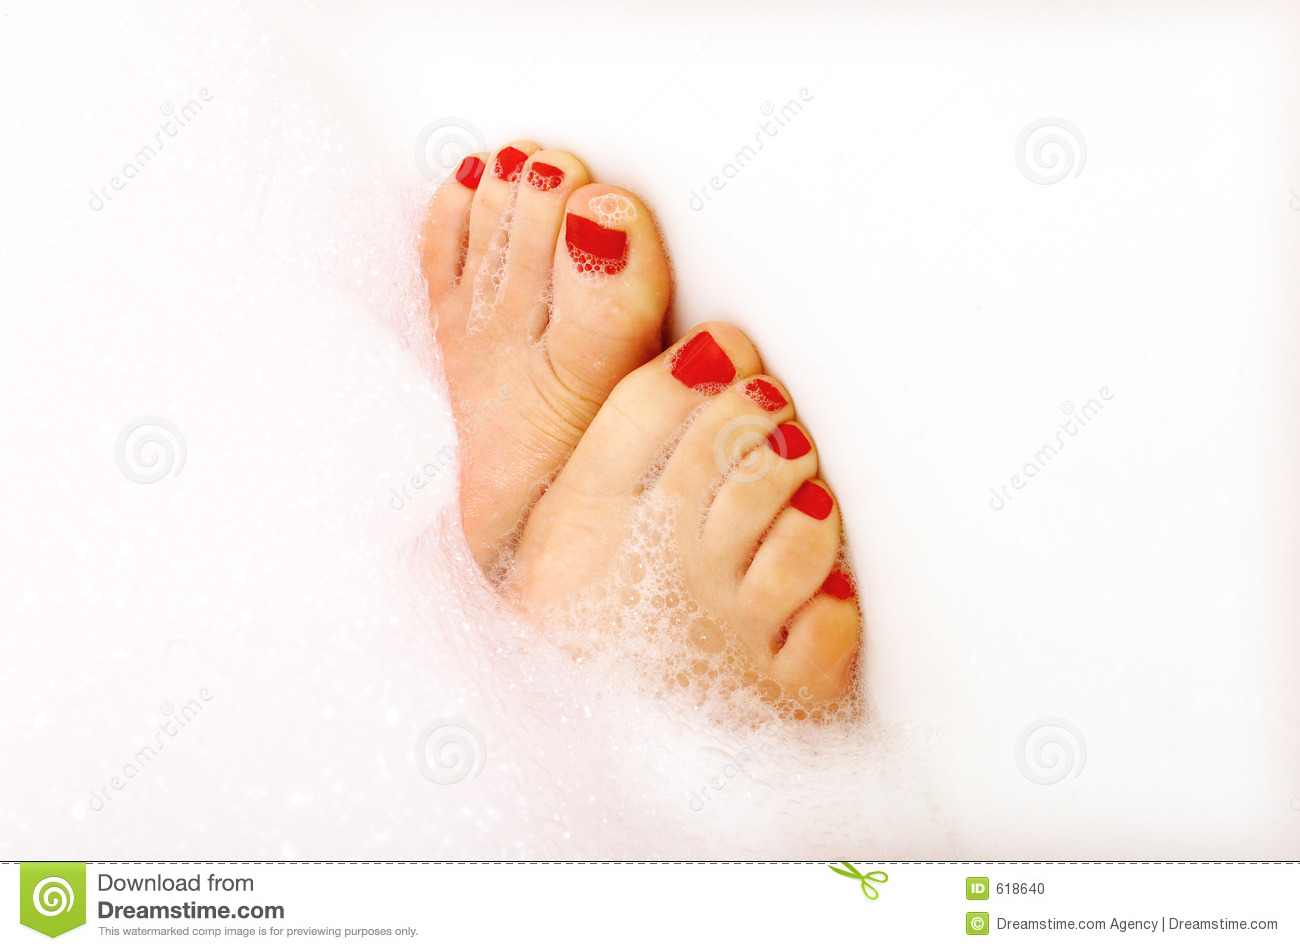 Painted Toes Stock Photo   Image  618640